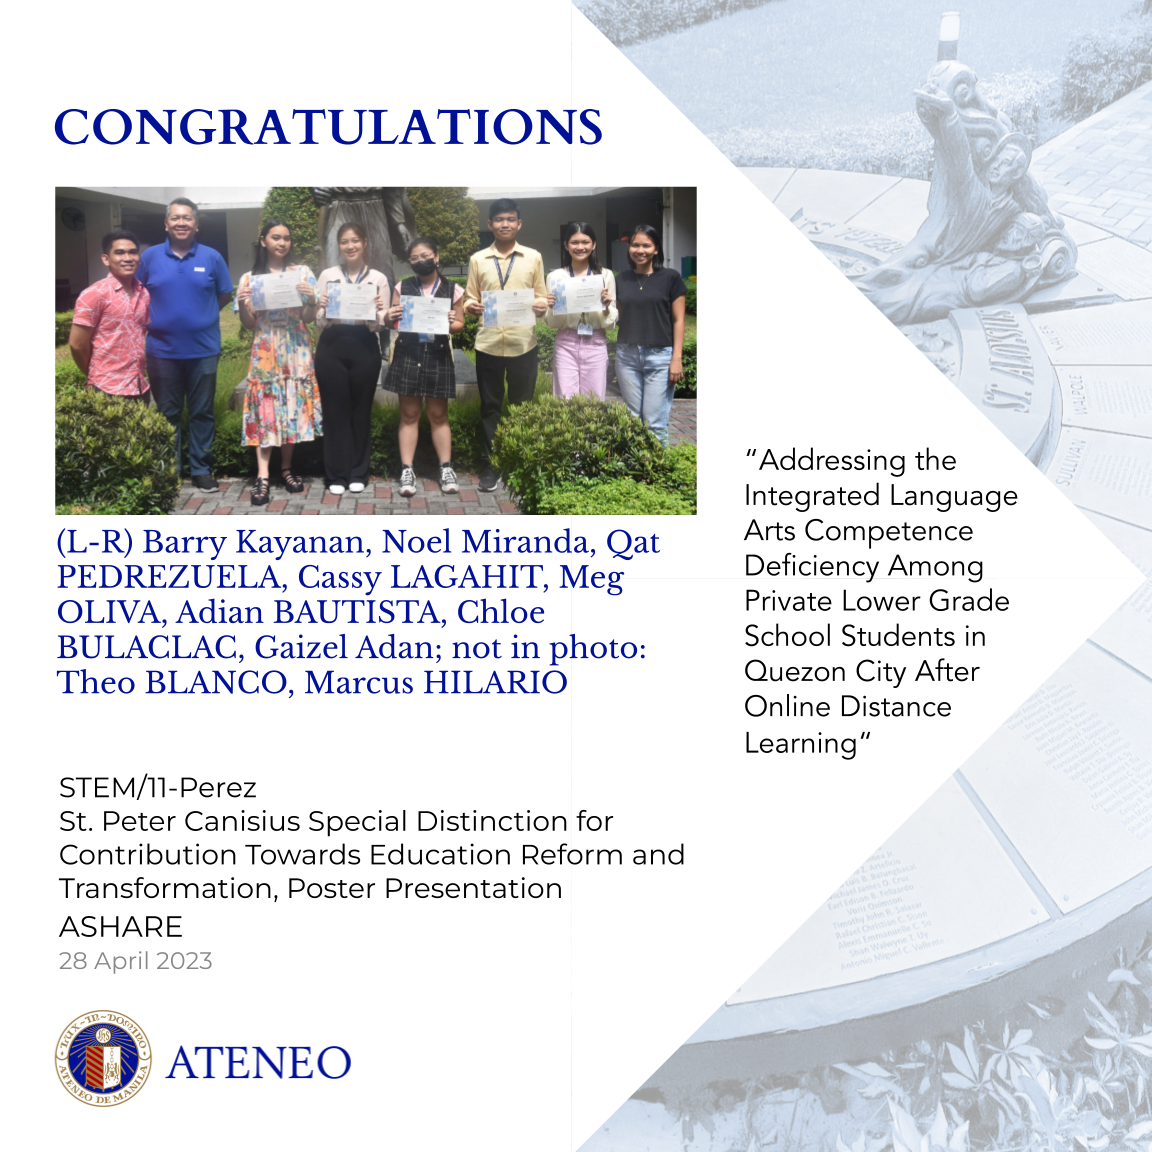 "Addressing the Integrated Language Arts Competence Deficiency Among Private Lower Grade School Students in Quezon City After Online Distance Learning" by Bautista, Blanco, Bulaclac, Hilario, Lagahit, Oliva, and Pedrezuela